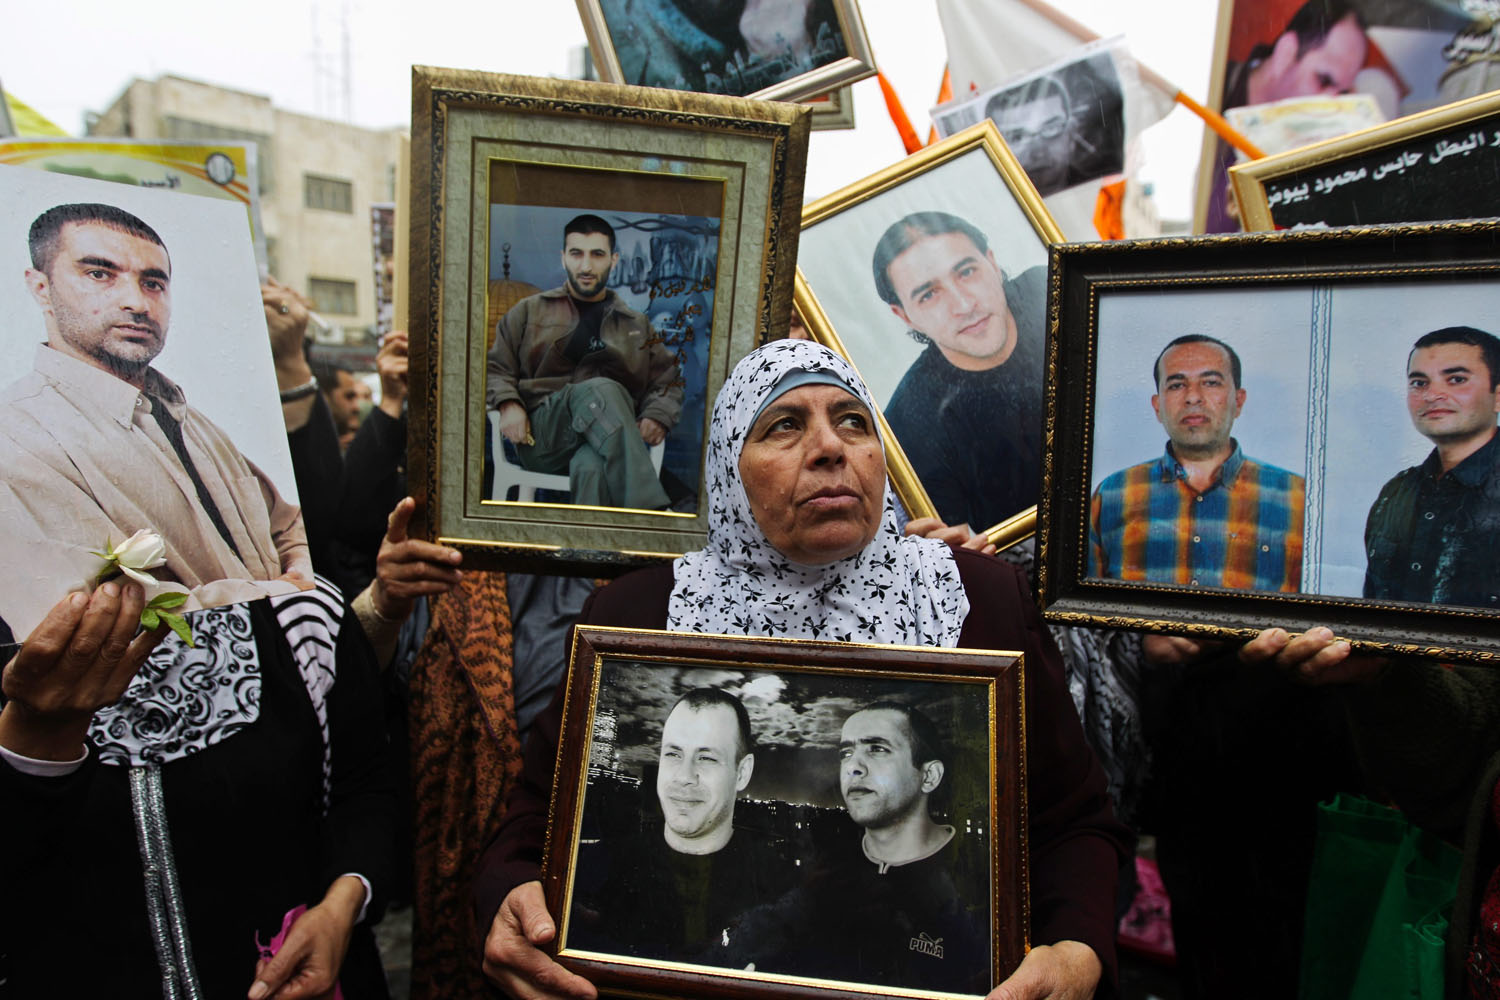 April 17, 2013. Palestinians carry portraits of prisoners while attending a rally to highlight the situation of some 4700 Palestinians currently jailed in Israel during a rally on the annual Palestinian Prisoners' Day in the West Bank city of Ramallah.